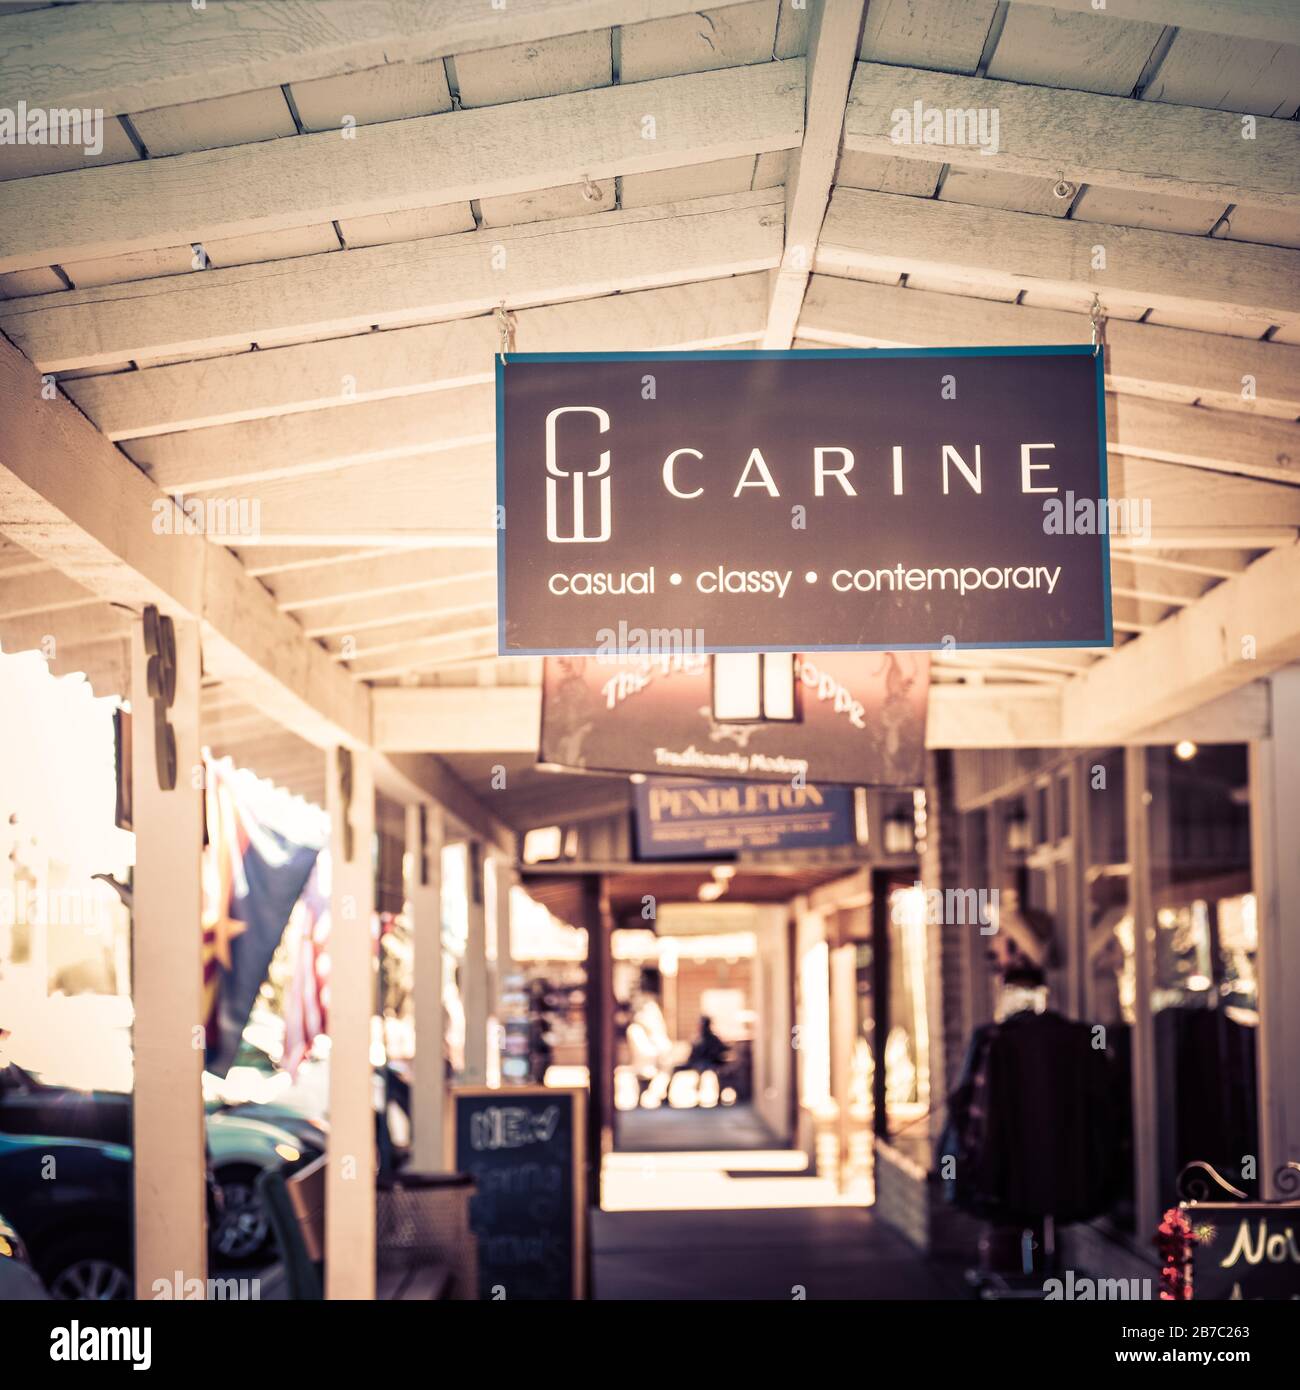 An overhead sign for Carine W, a fashionable boutique, hangs from the old wooden ceiling of the portal along the sidewalk and storefronts in old town Stock Photo